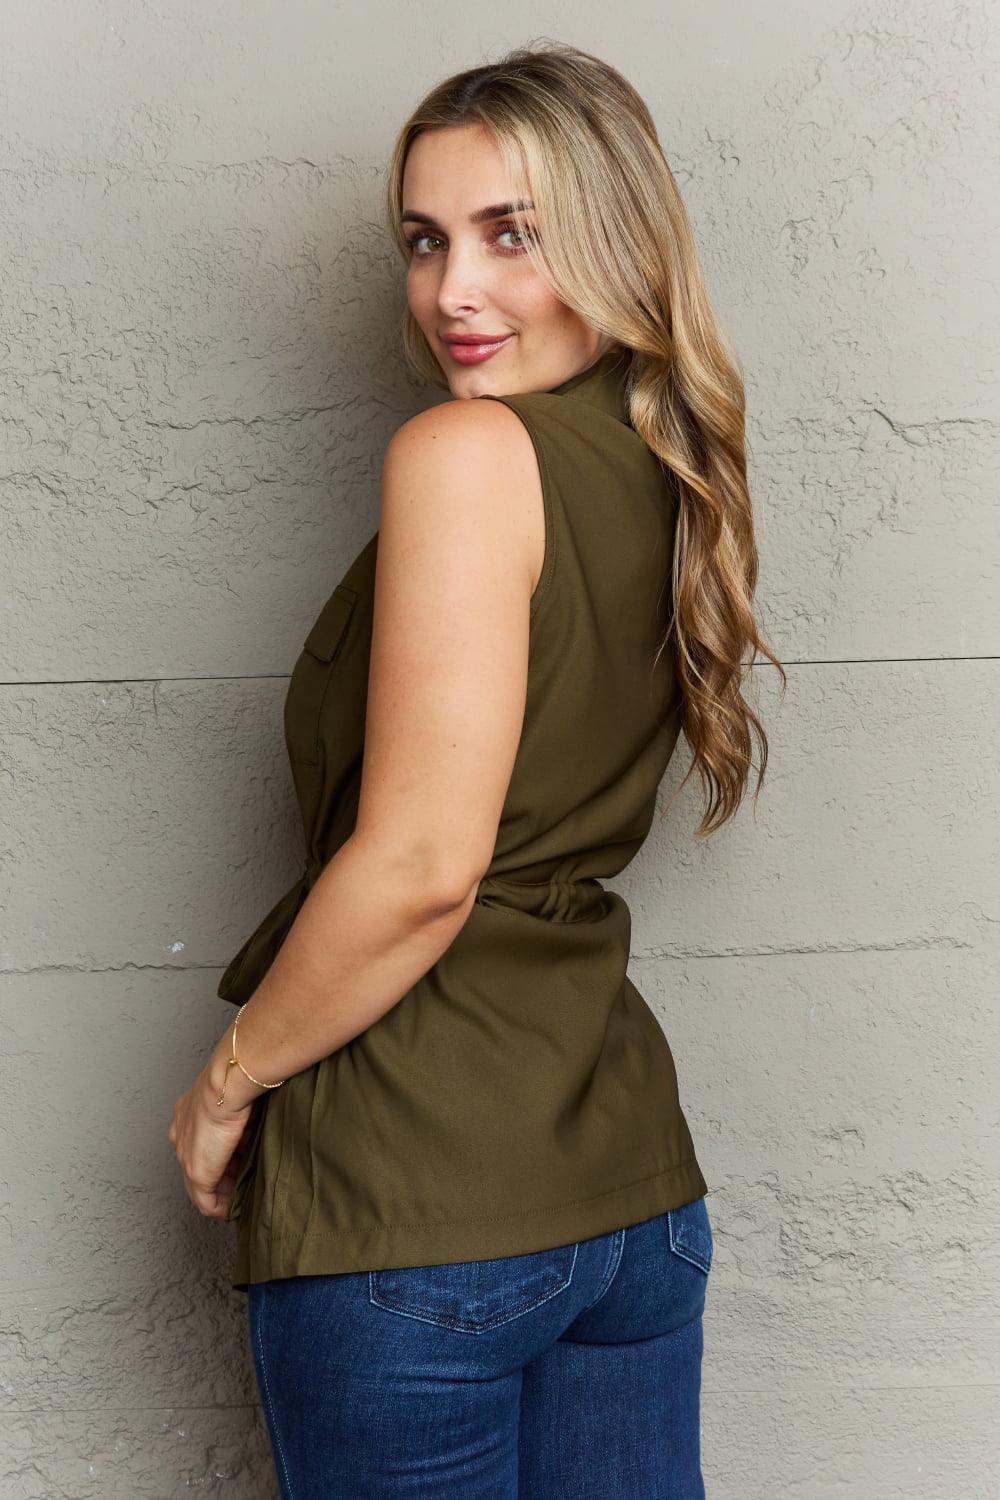 Women's Shirts Army Green Sleeveless Collared Top